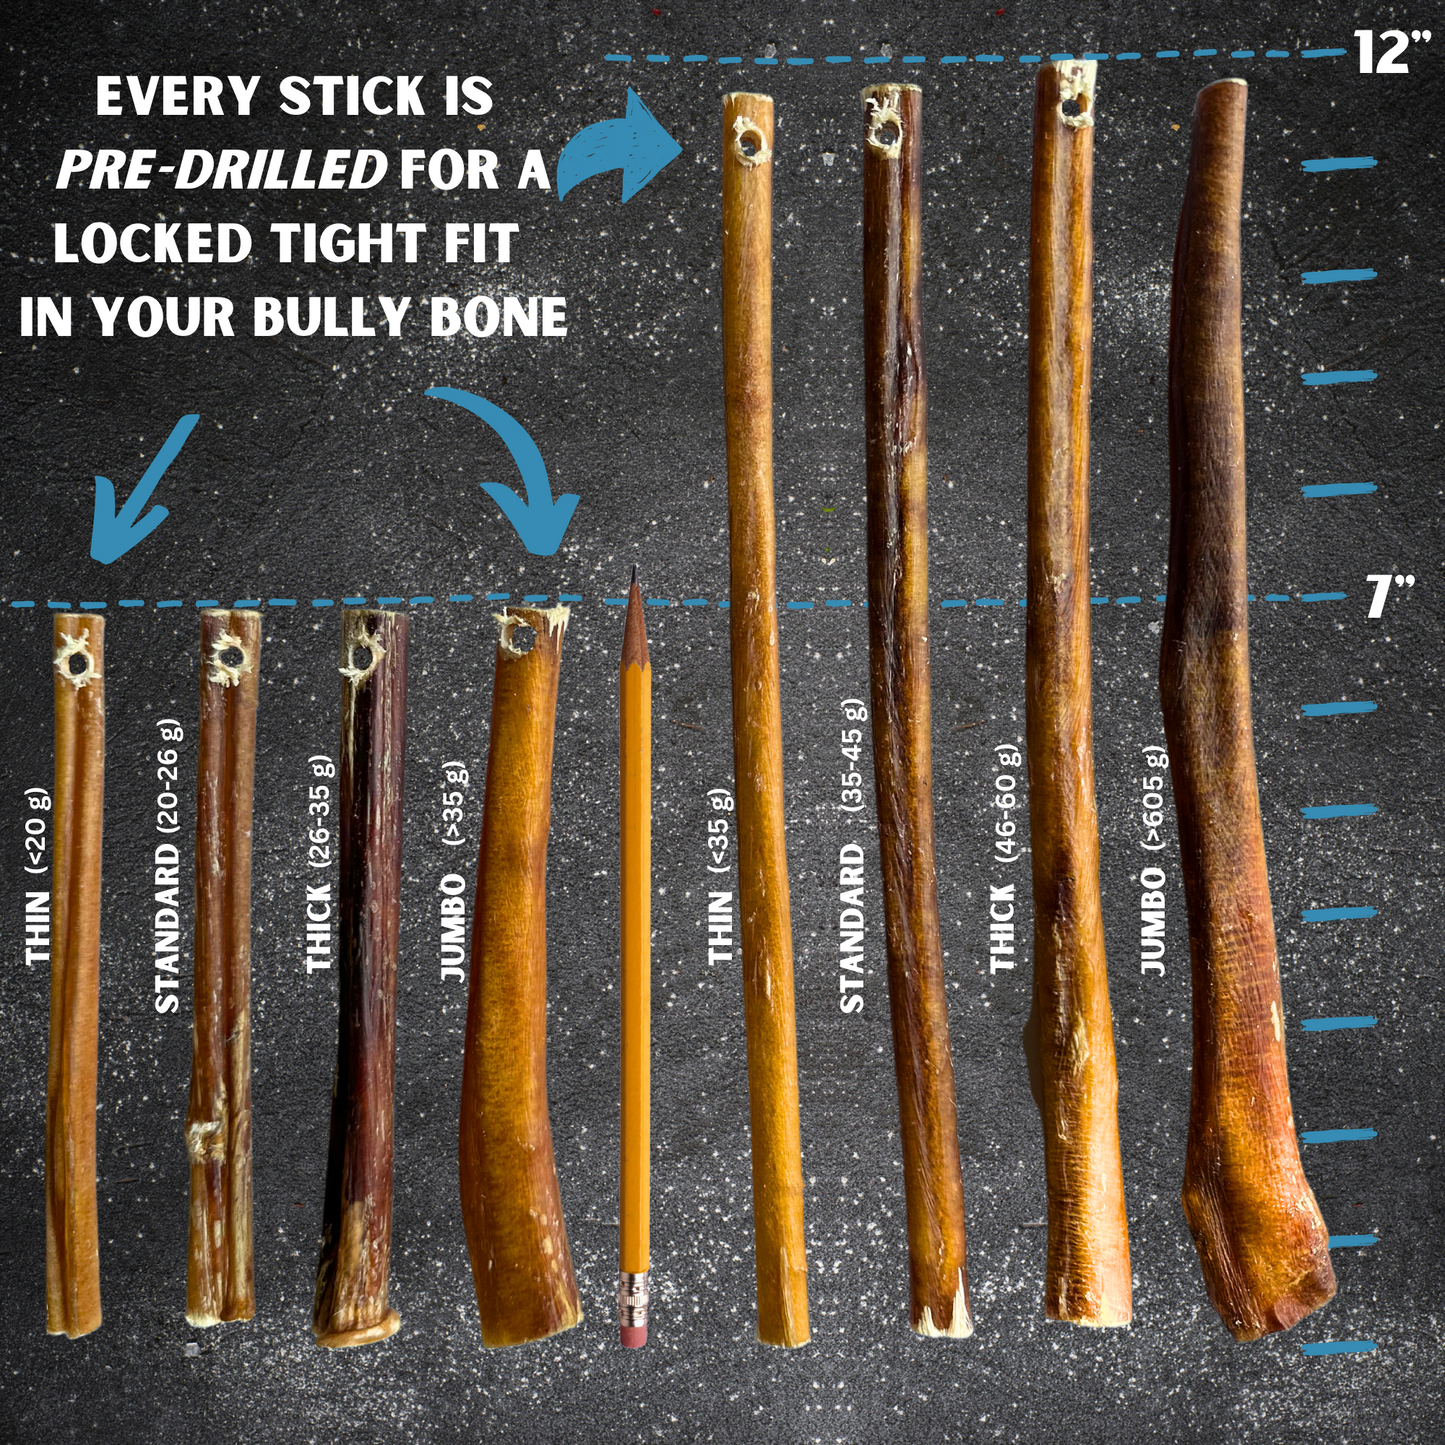 7" Thick Bully Sticks - Bully Bone Included